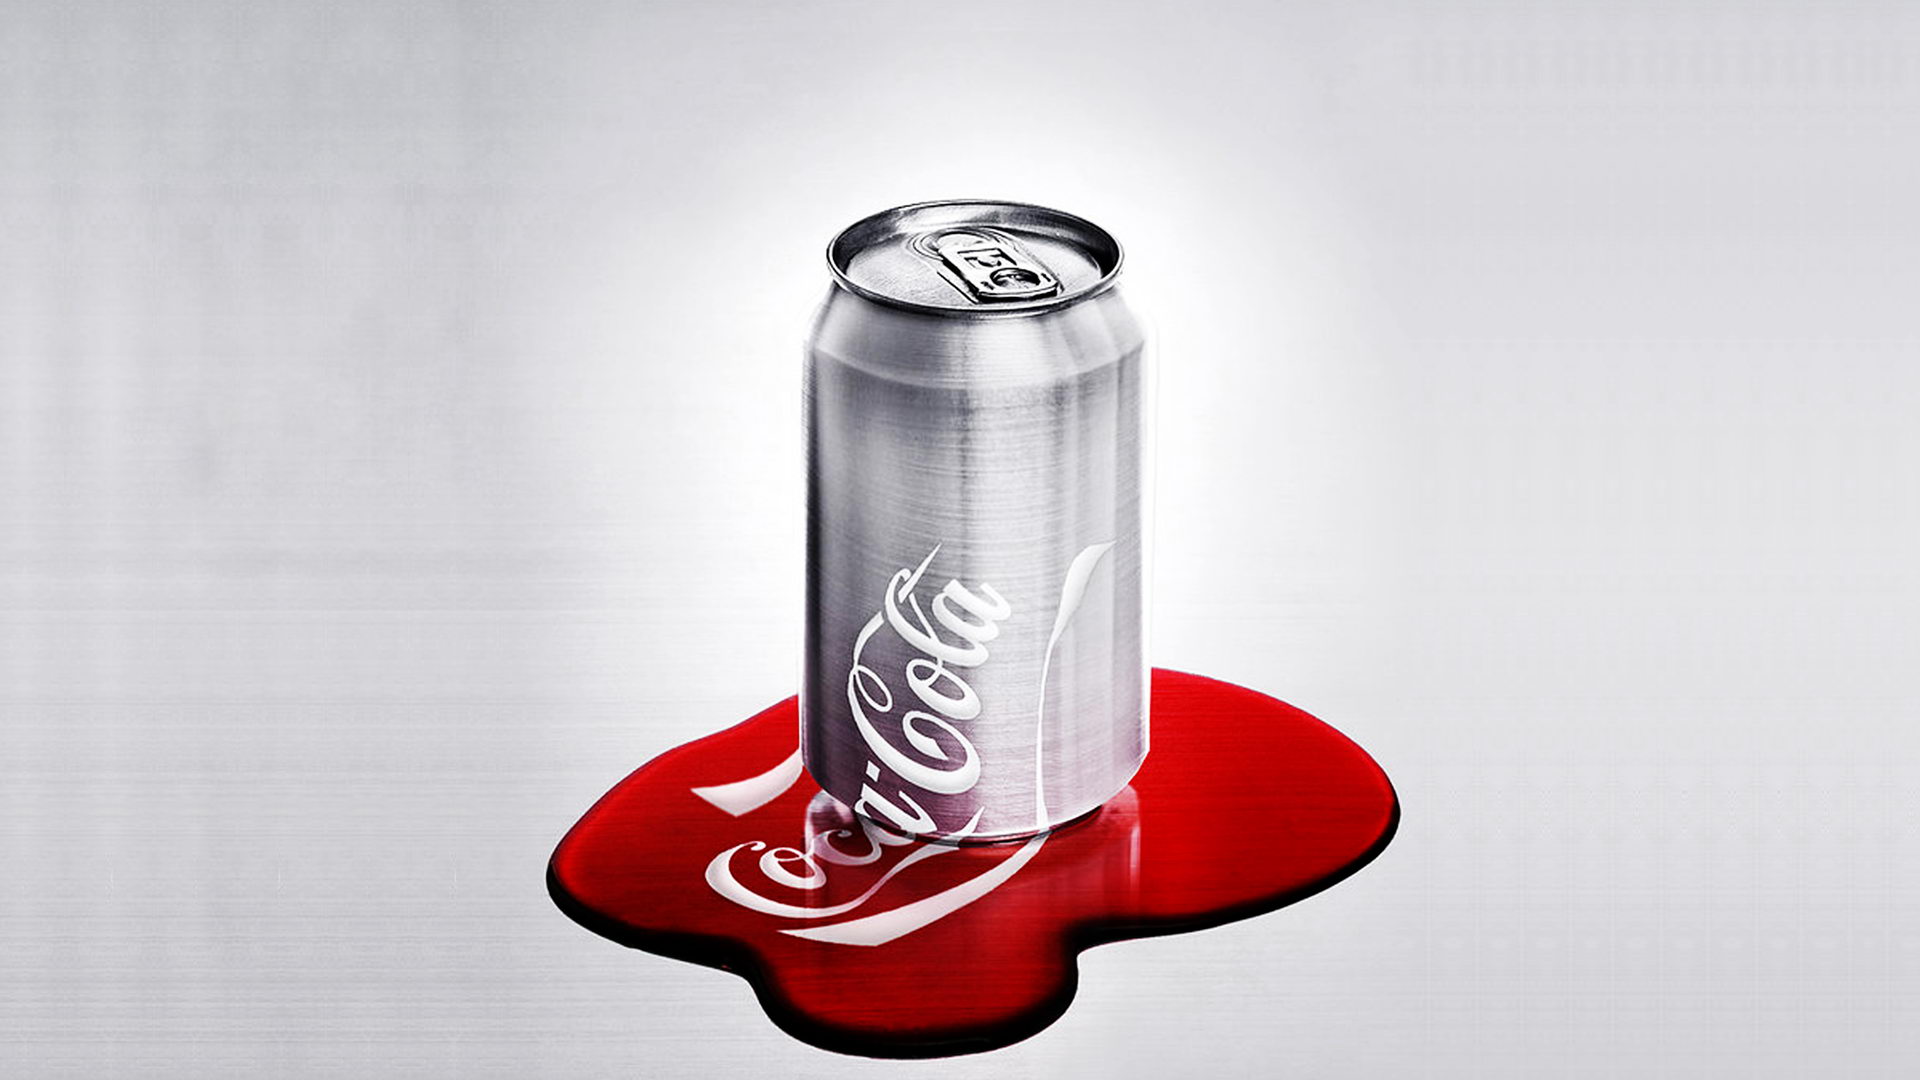 cola wallpaper,beverage can,aluminum can,coca cola,cola,carbonated soft drinks